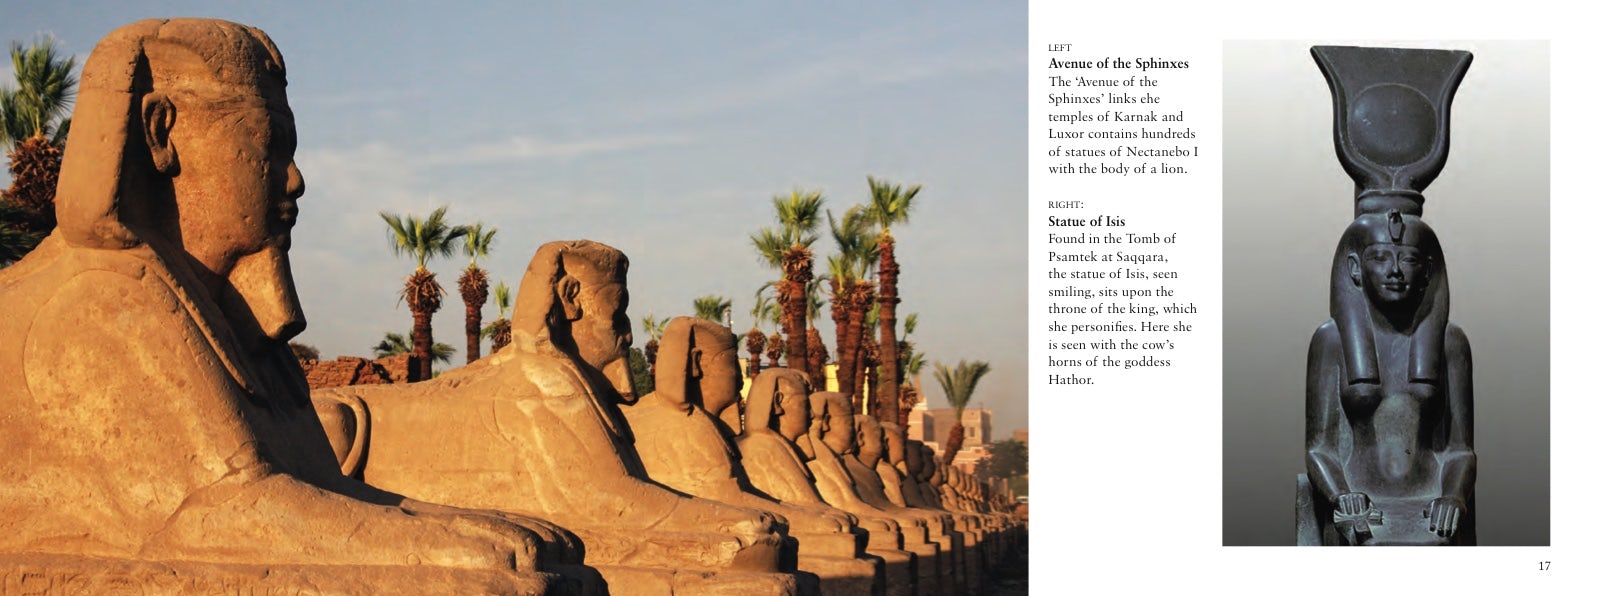 Ancient Egypt by Peter Mavrikis: 9781838860165 - Union Square & Co.